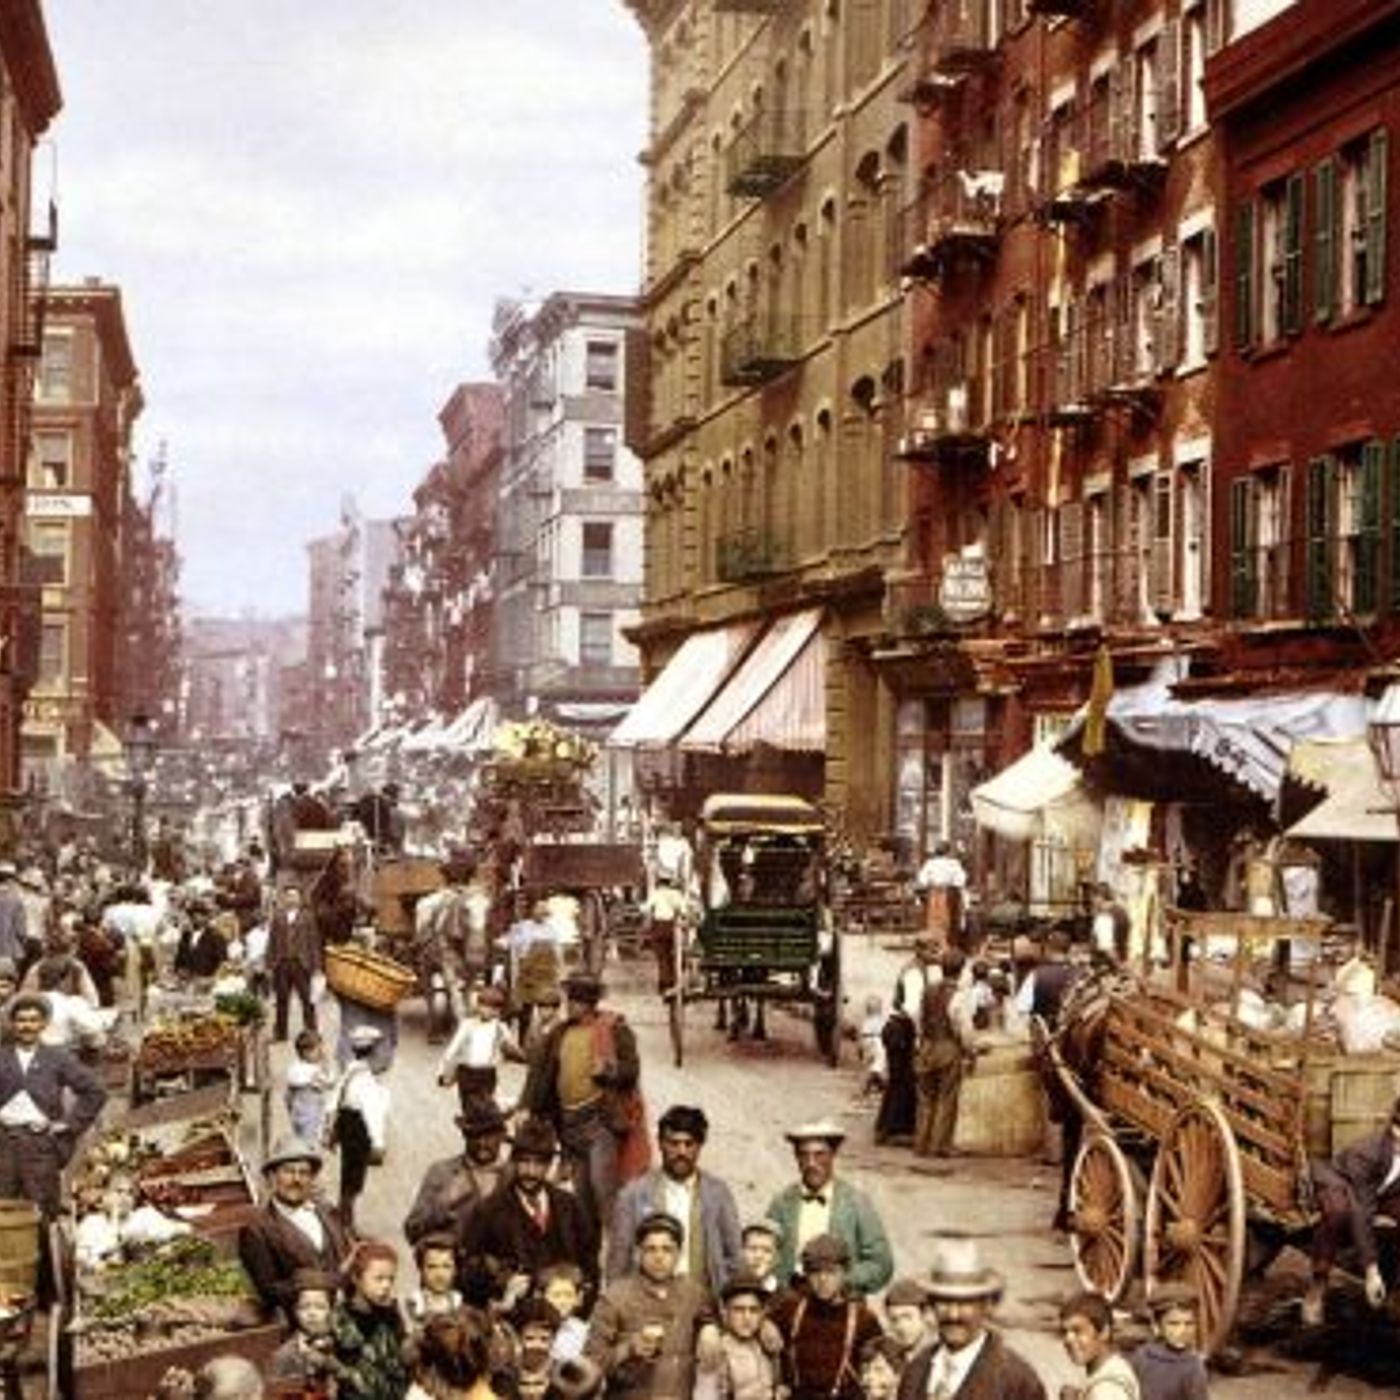 The History of Jewish Life in NYC